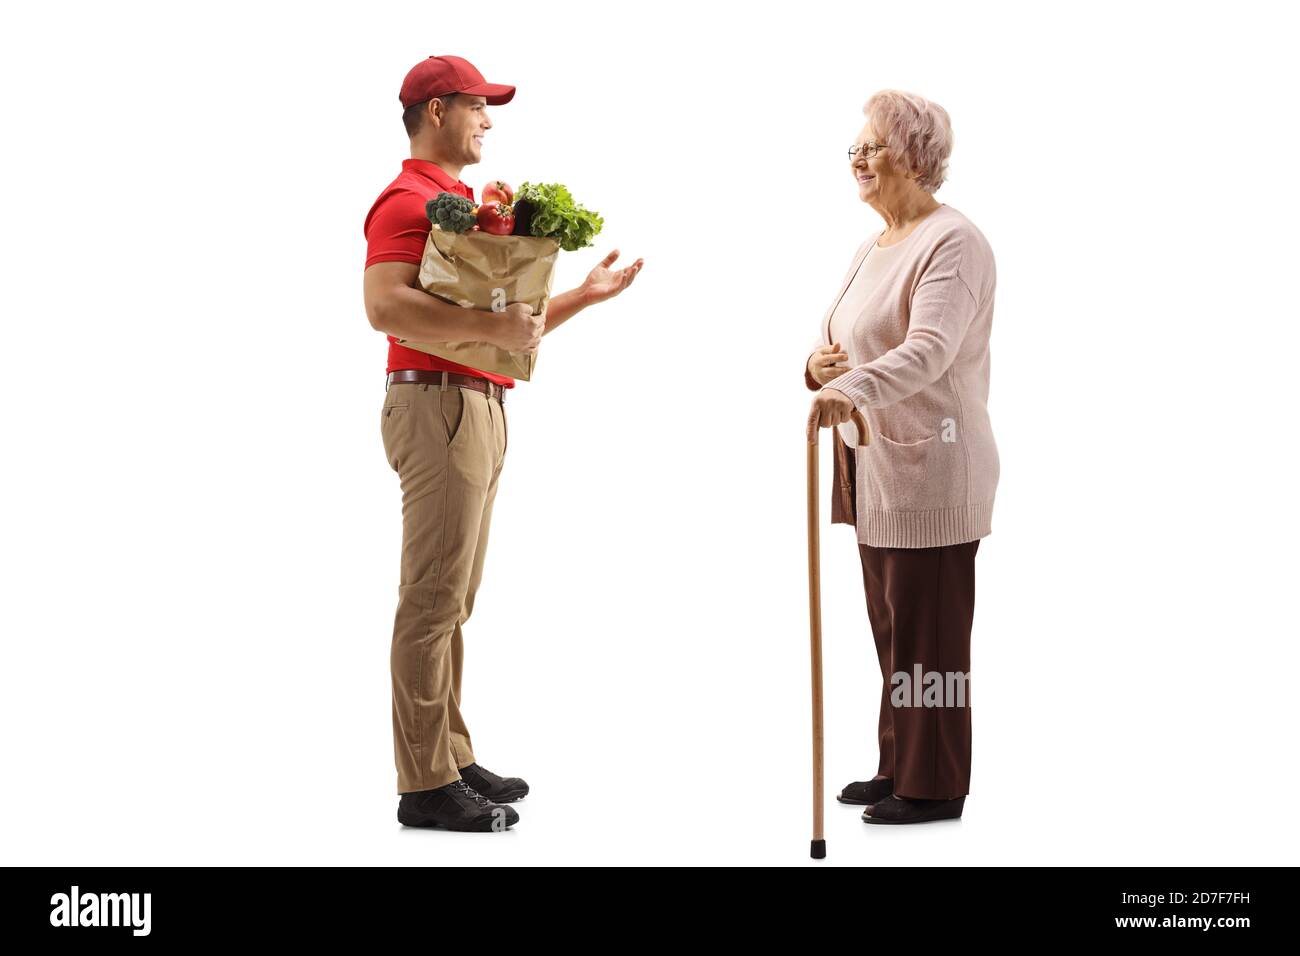 Full length profile shot of a delivery guy with a grocery bag talking to an elderly woman isolated on white background Stock Photo